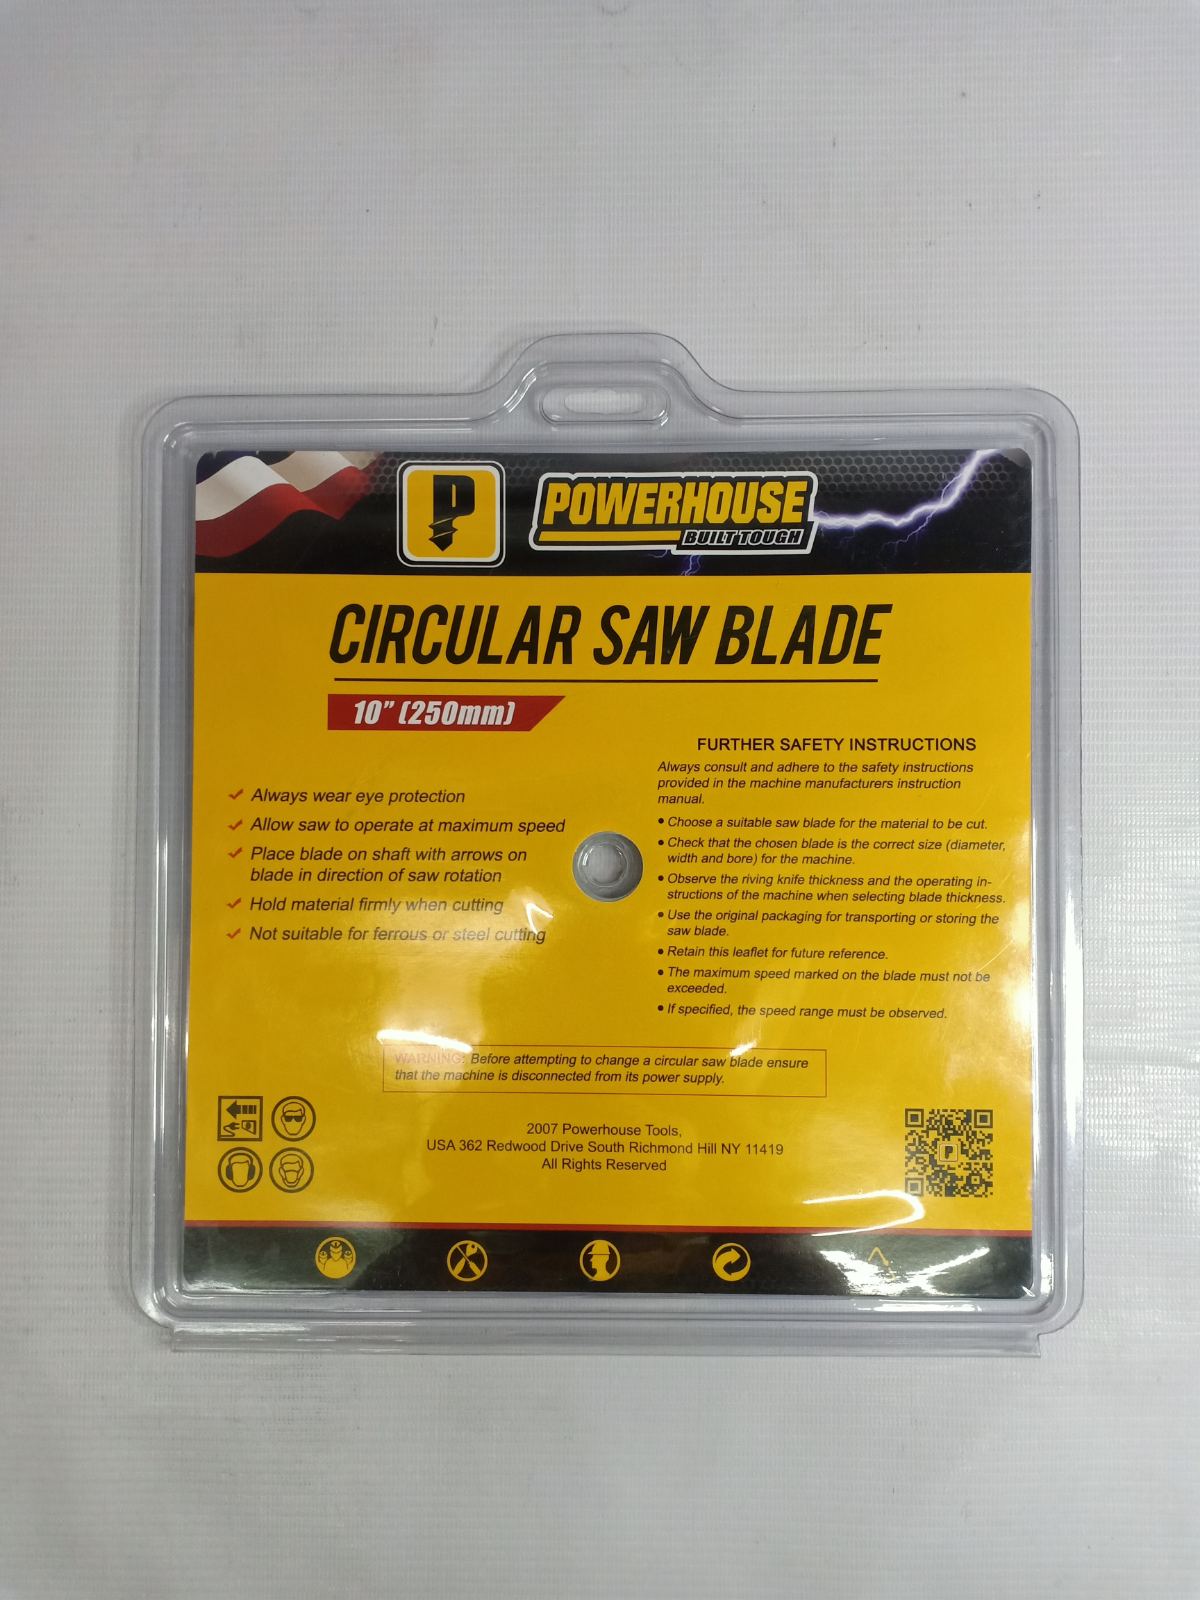 POWERHOUSE PH-CSWOOD-10"X30T Circular Saw Blade 10 inches for Wood 10" x 30T